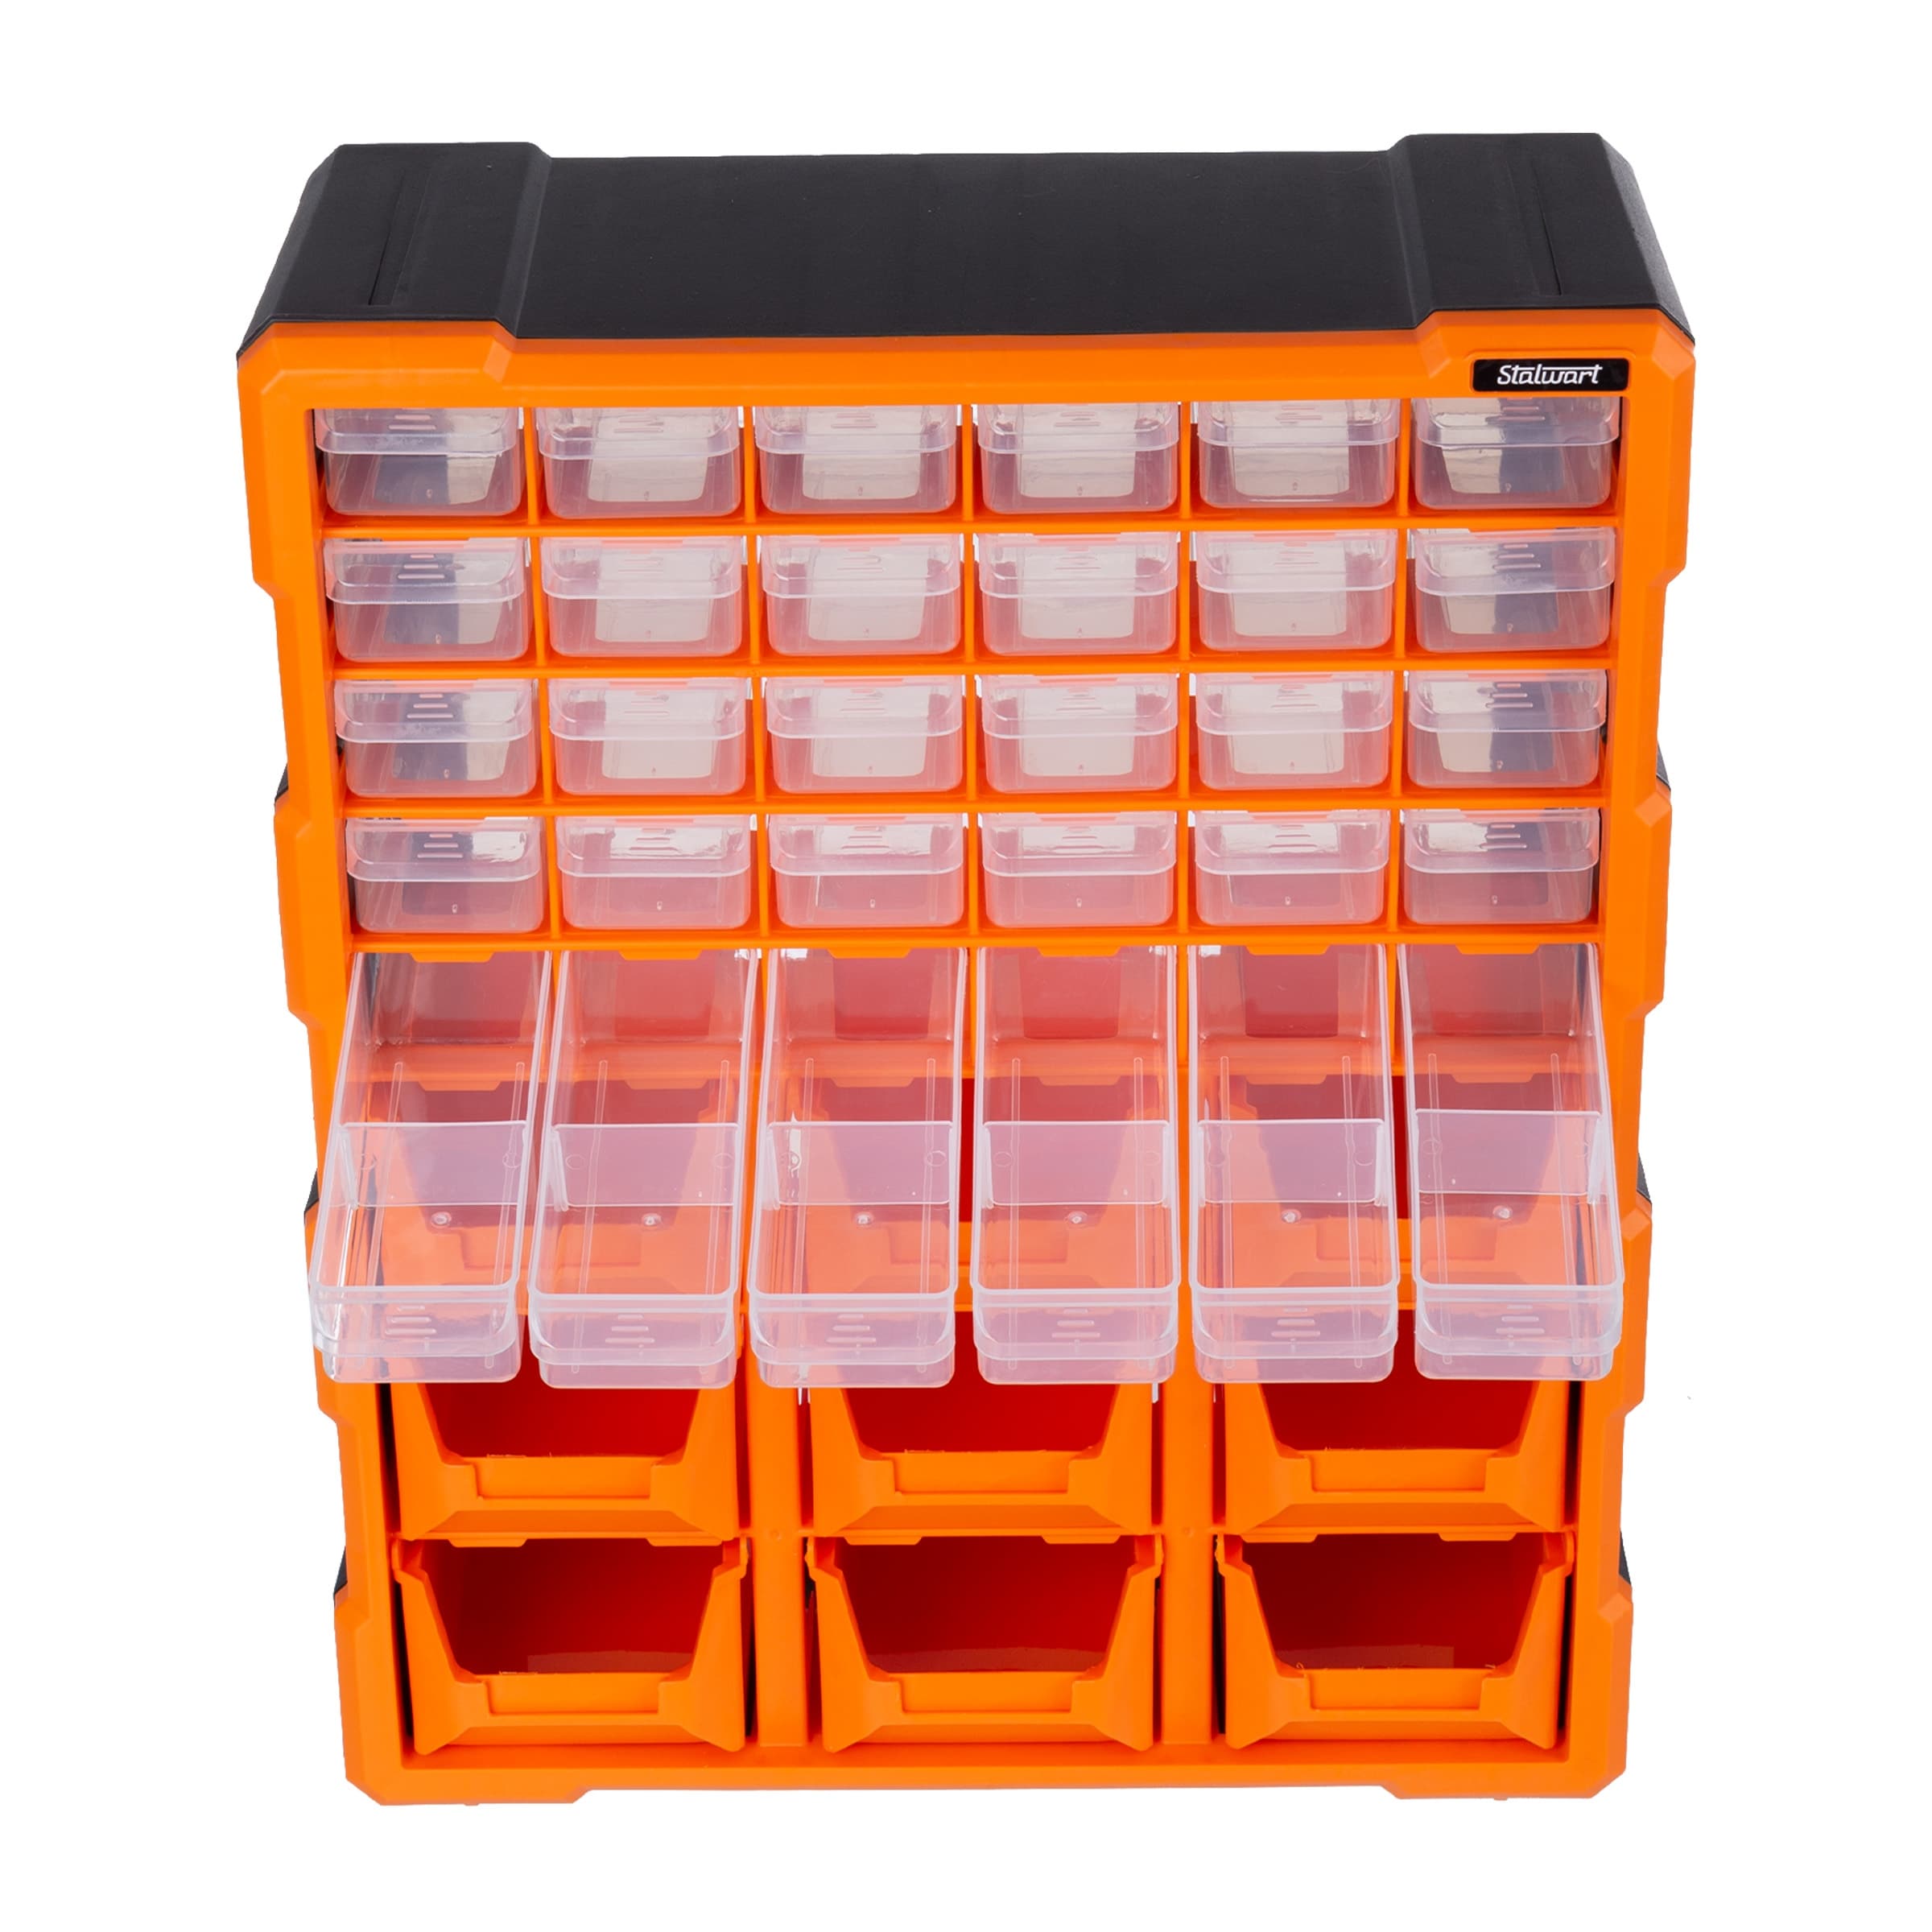 https://ak1.ostkcdn.com/images/products/is/images/direct/f31ffc900e6249f875d40e63a41209237e1cdd24/Plastic-Storage-Drawers---39-Drawer-Screw-Organizer-by-Stalwart-%28Black%29.jpg